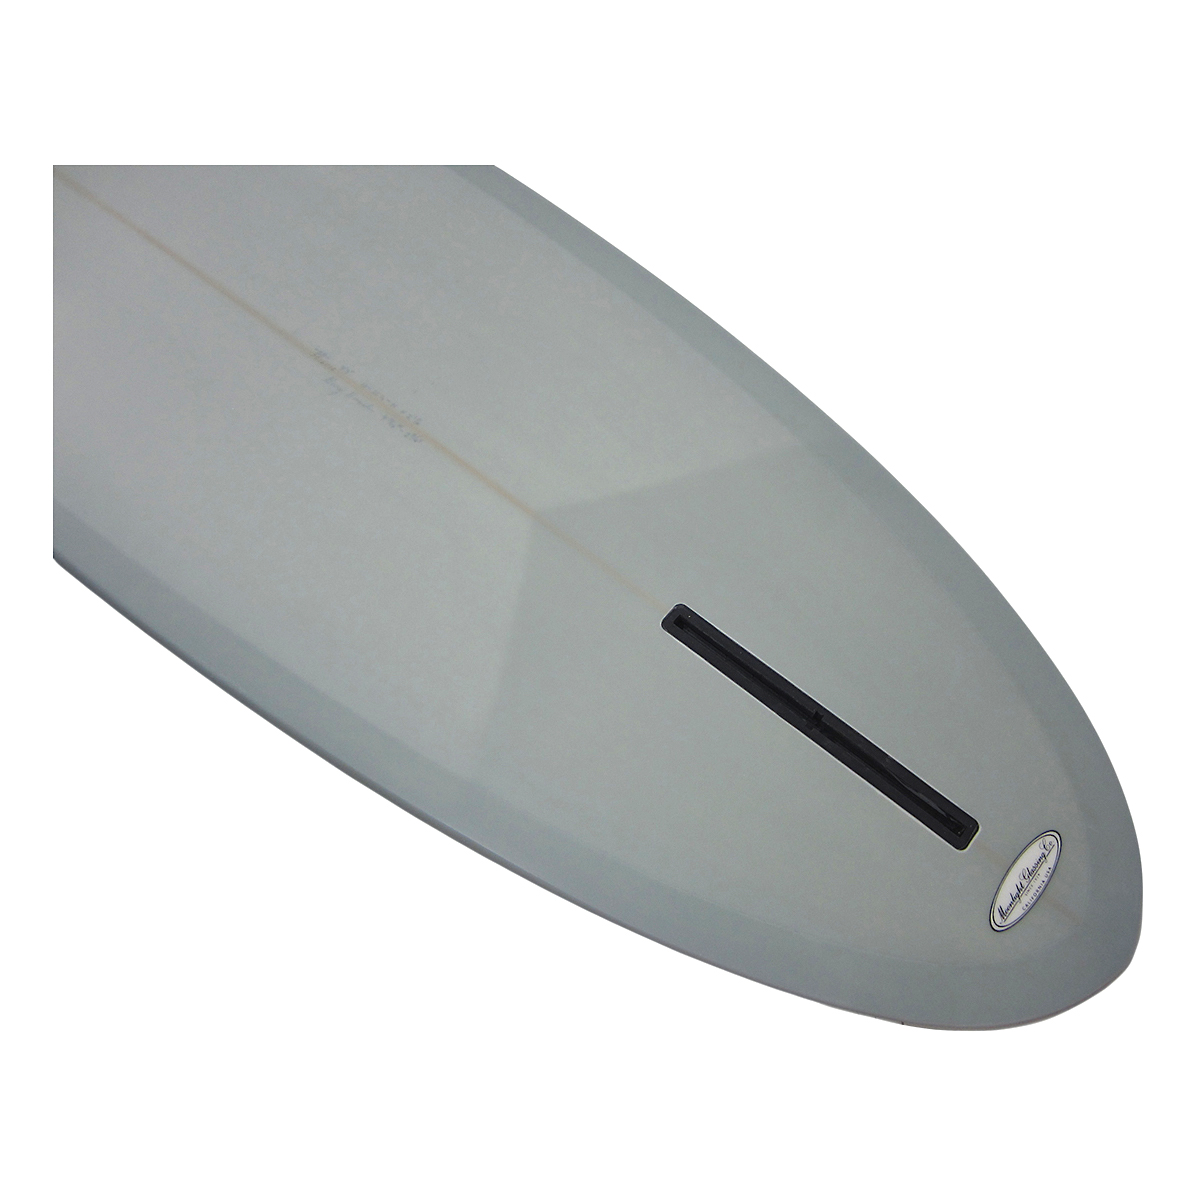 Gary Hanel Surfboards : Mini Tanker Round Pin Tail